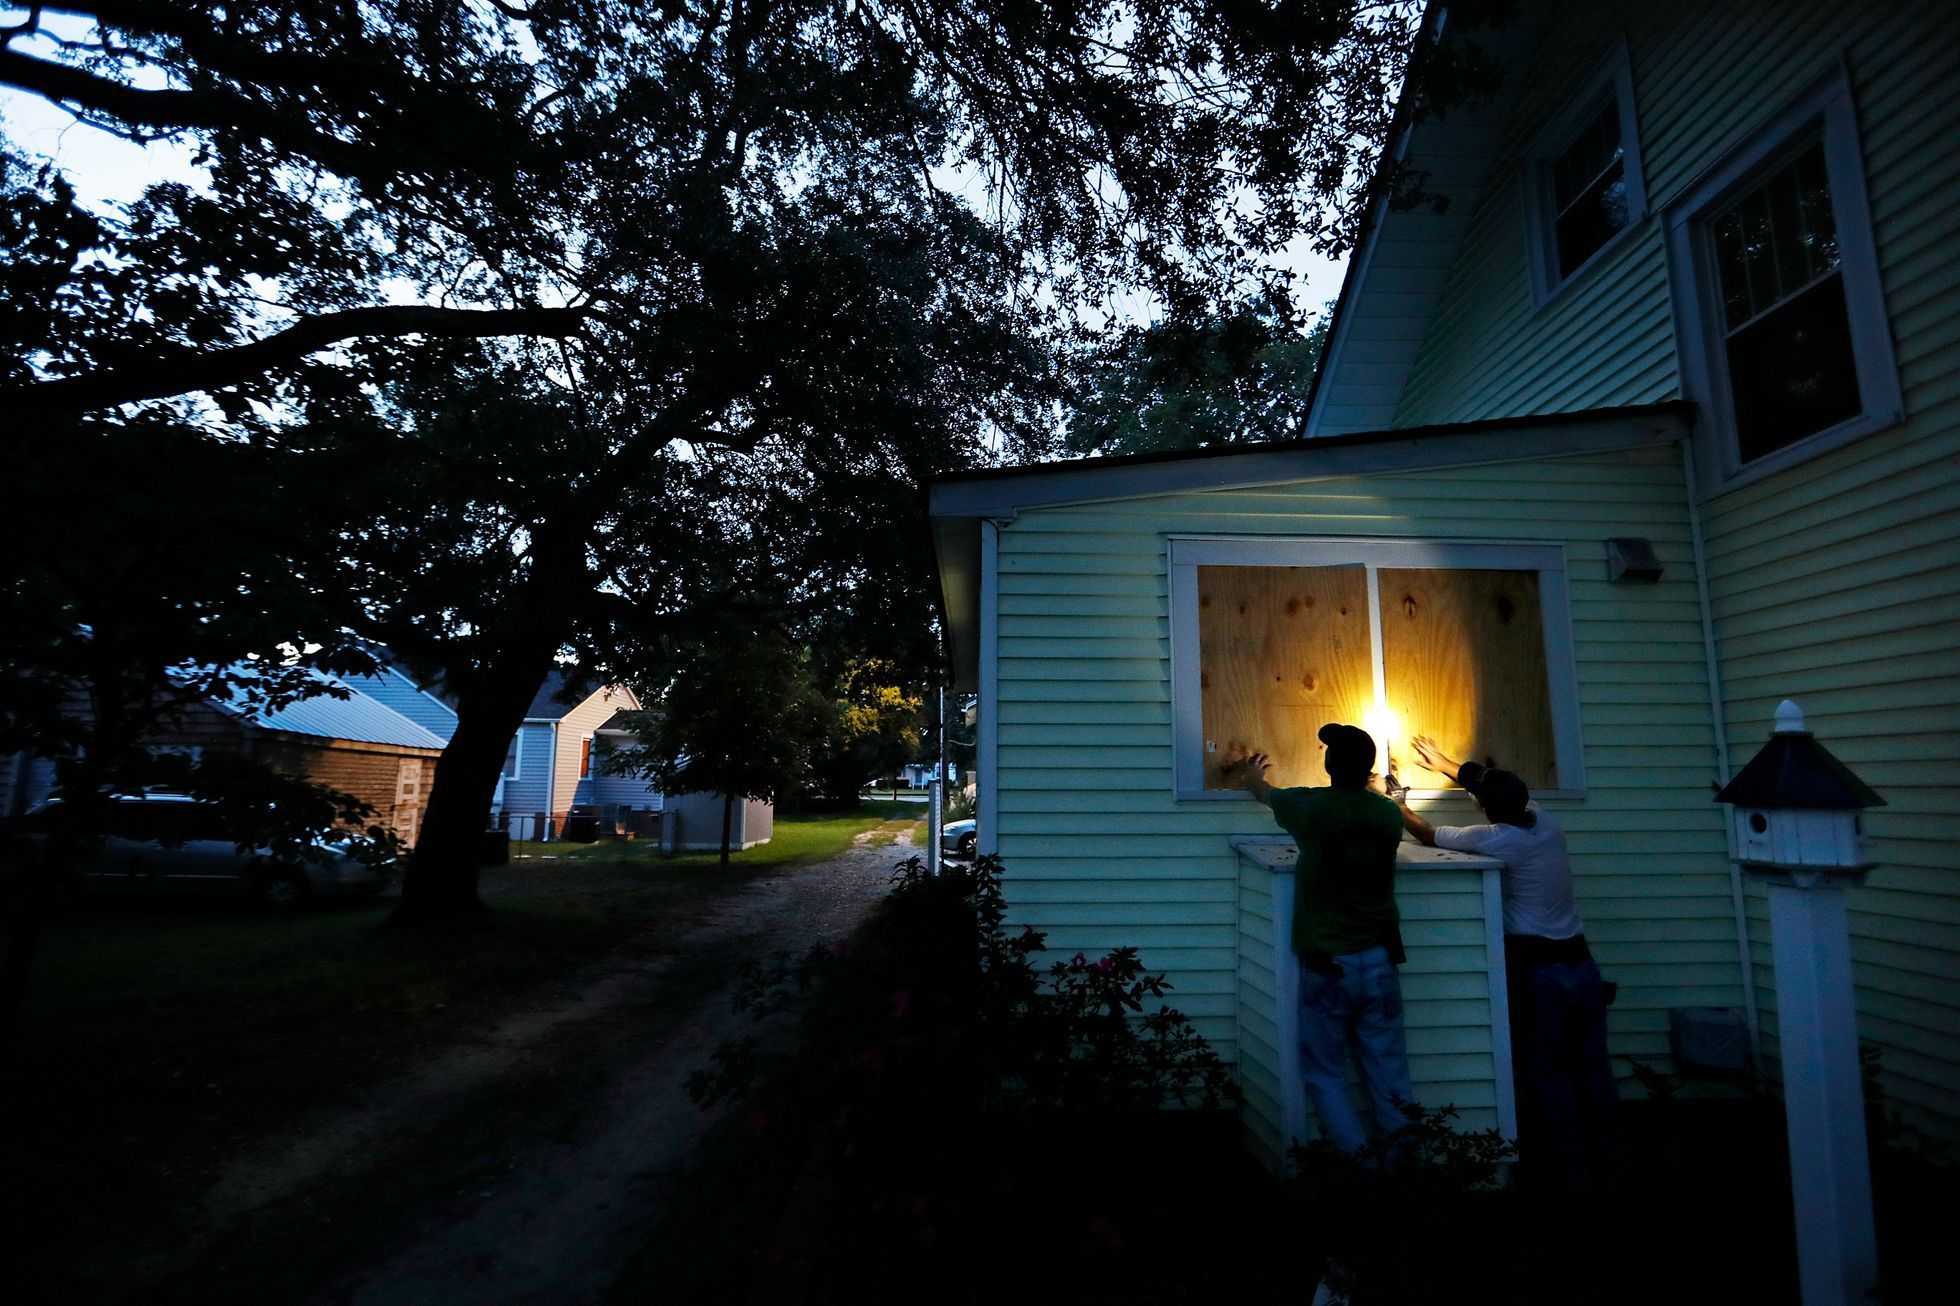 Russell Meadows, left, helps neighbor Rob Muller board up his home ahead of Hurricane Florence in Morehead City, N.C.